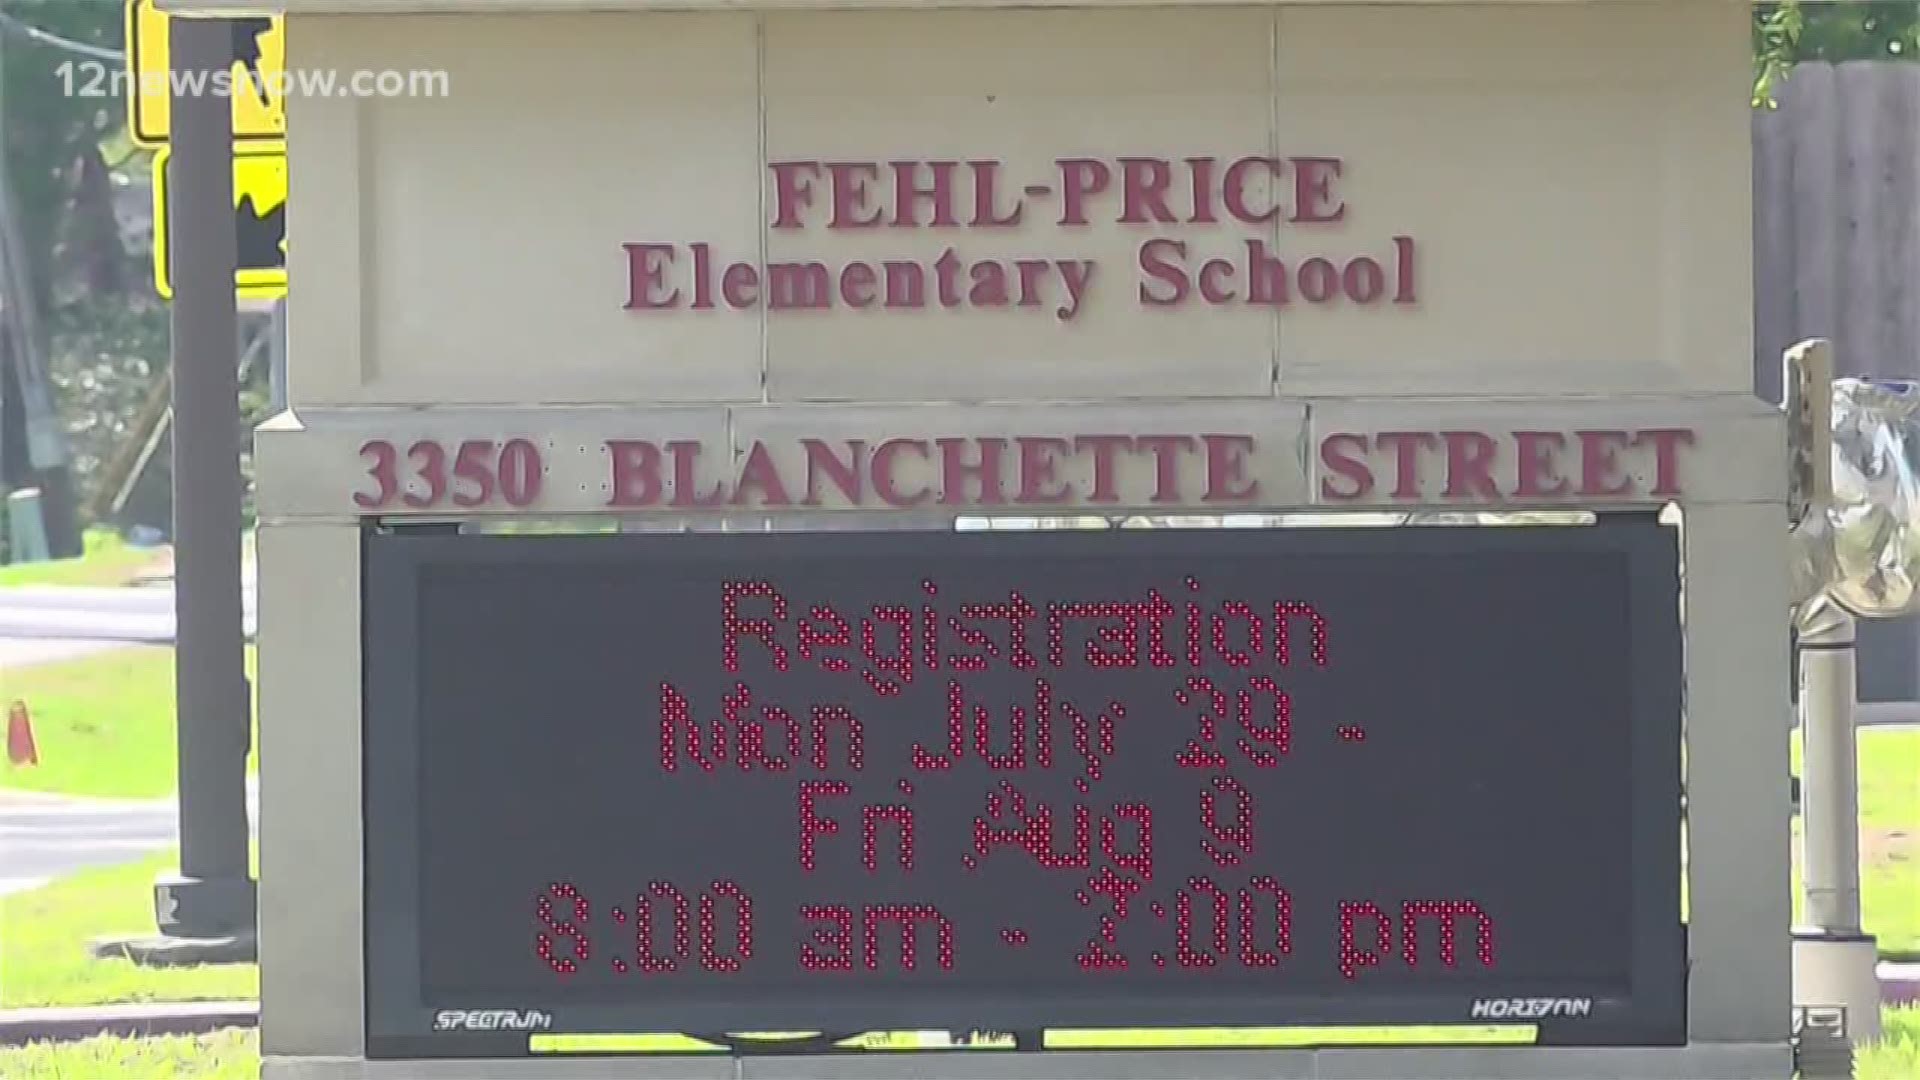 Jones-Clark Elementary, Smith Middle School and now Fehl-Price Elementary School will be operated by Third Future.